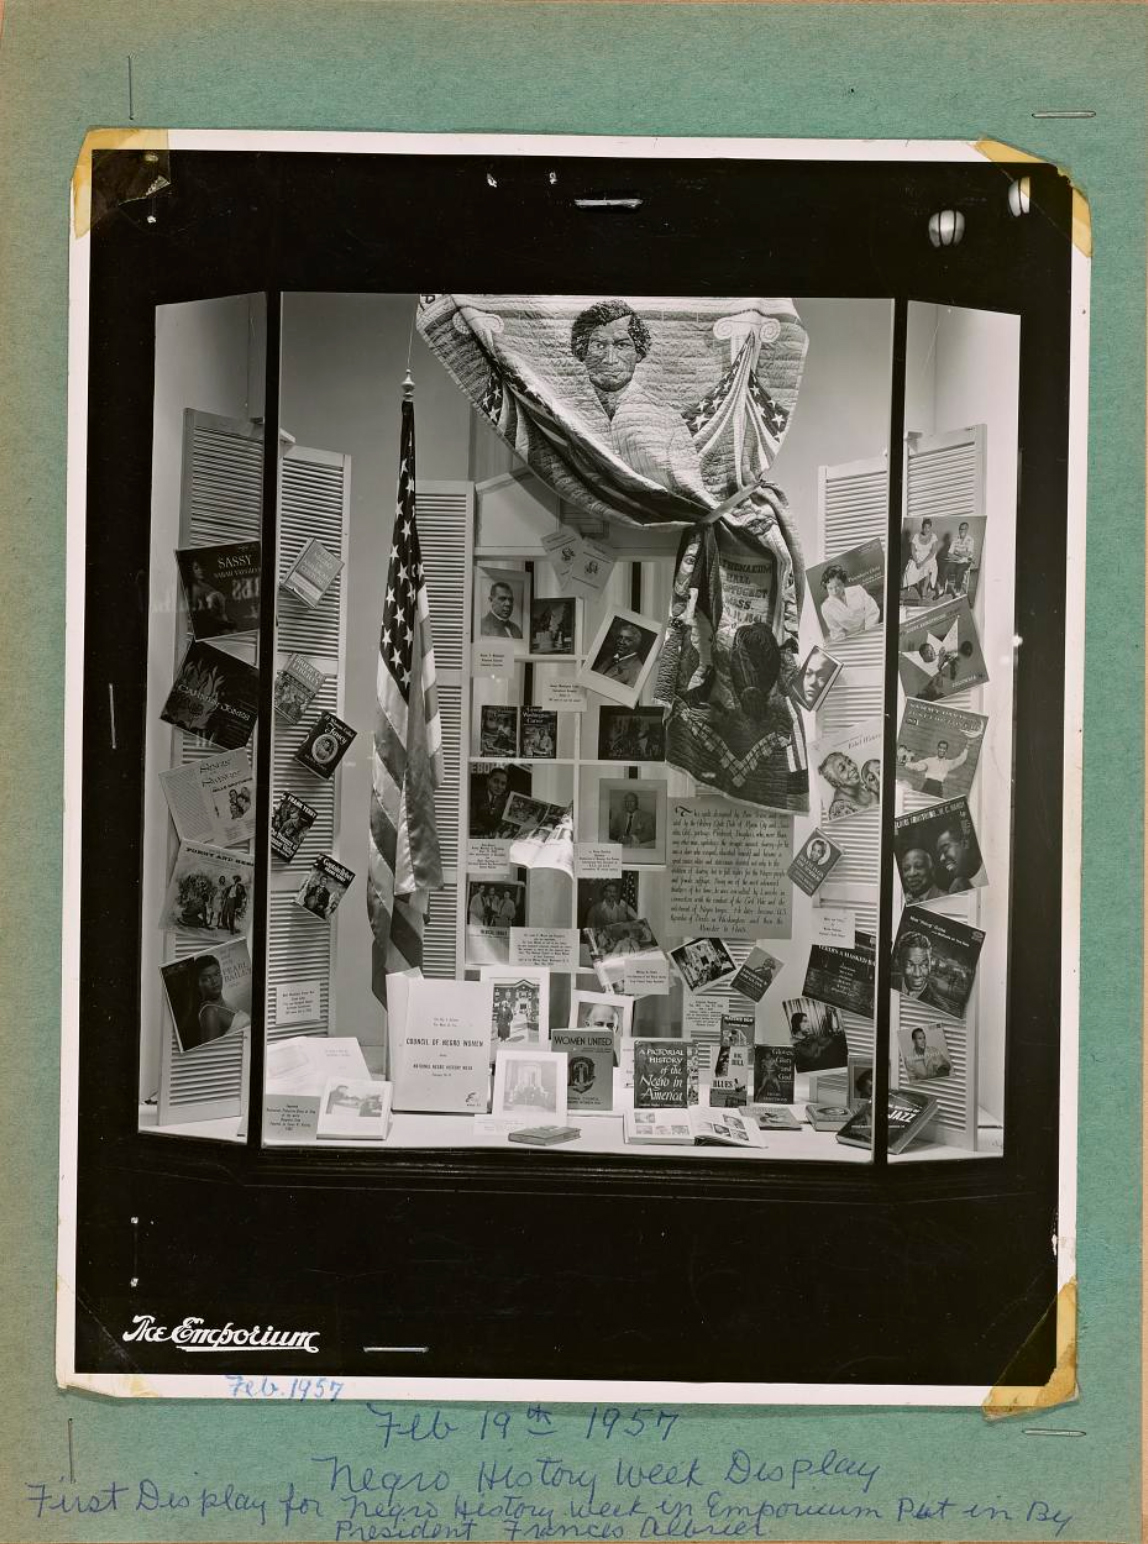 Scrapbook page compiled by Frances Albrier, president of the San Fransisco chapter of the National Council of Negro Women, documenting the group’s Negro History Week display installed at The Emporium in 1957.